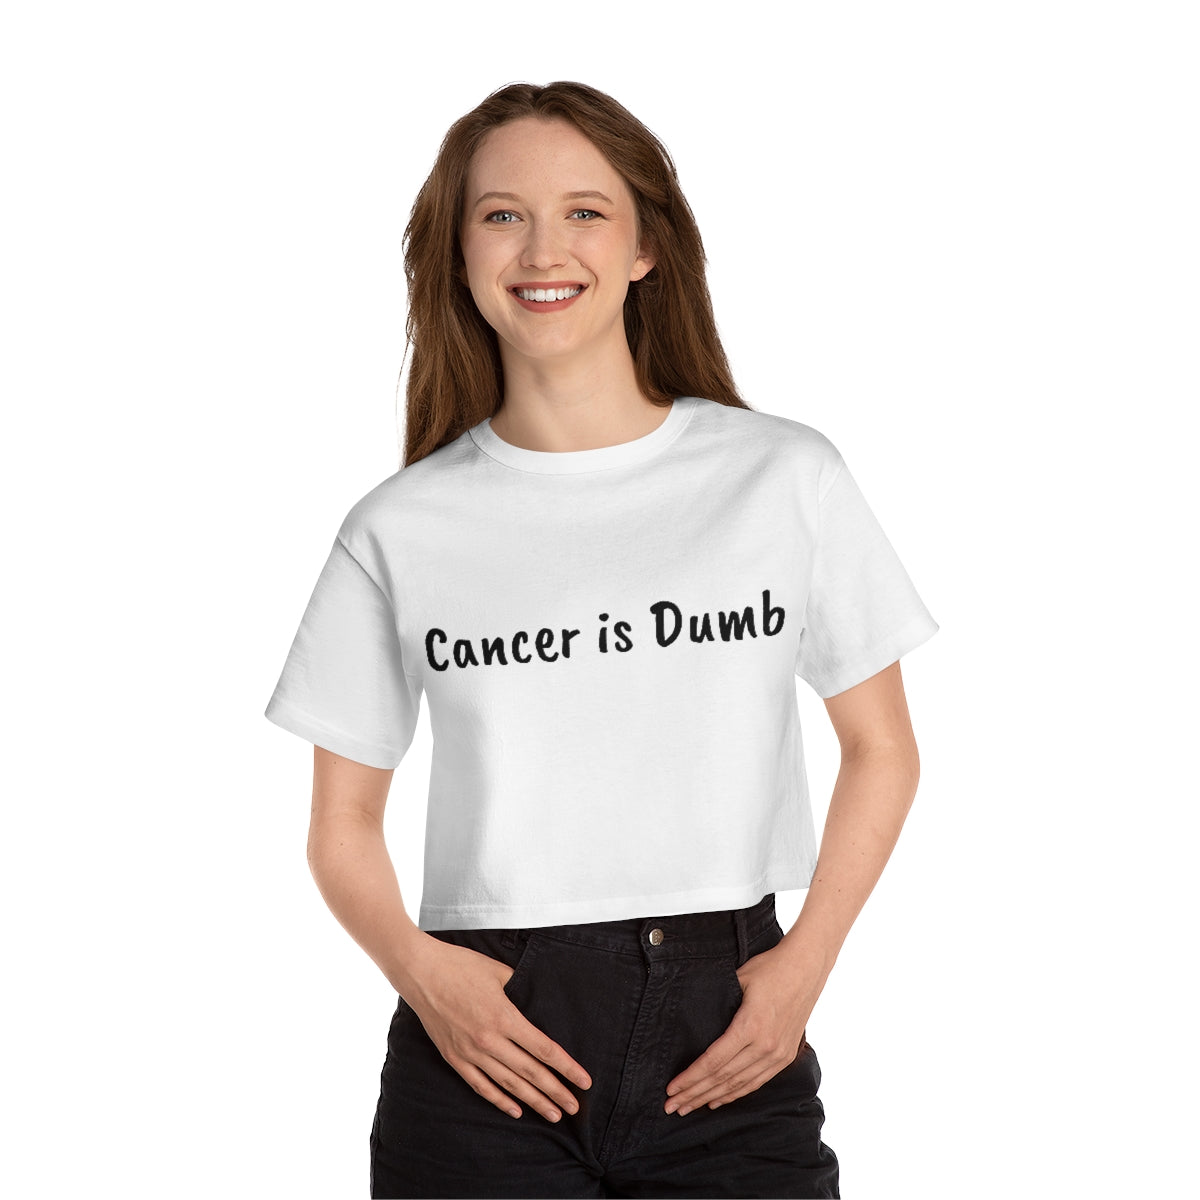 Champion Women's Heritage Cropped T-Shirt Anti Cancer Cancer is Dumb Shirt Tshirt Womens Apparel Survivor